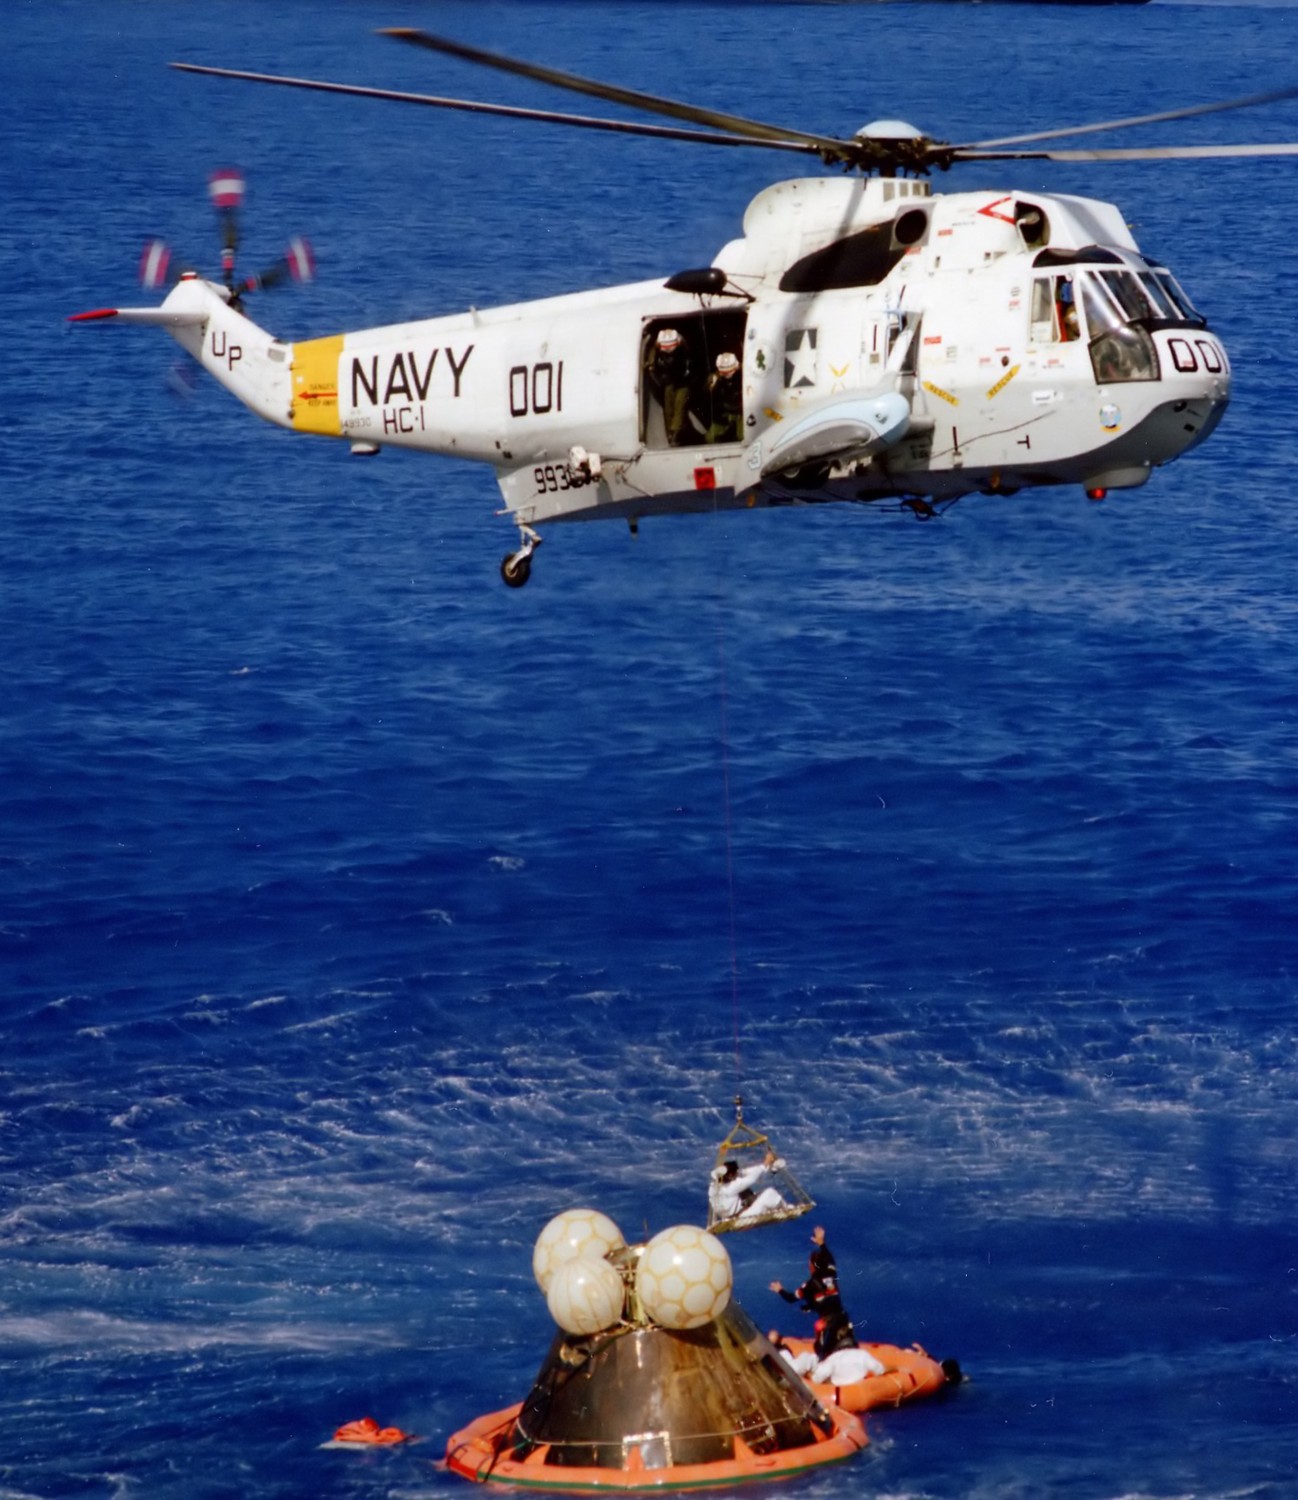 hc-1 pacific fleet angels helicopter combat support squadron sh-3g sea king 13 apollo 17 recovery